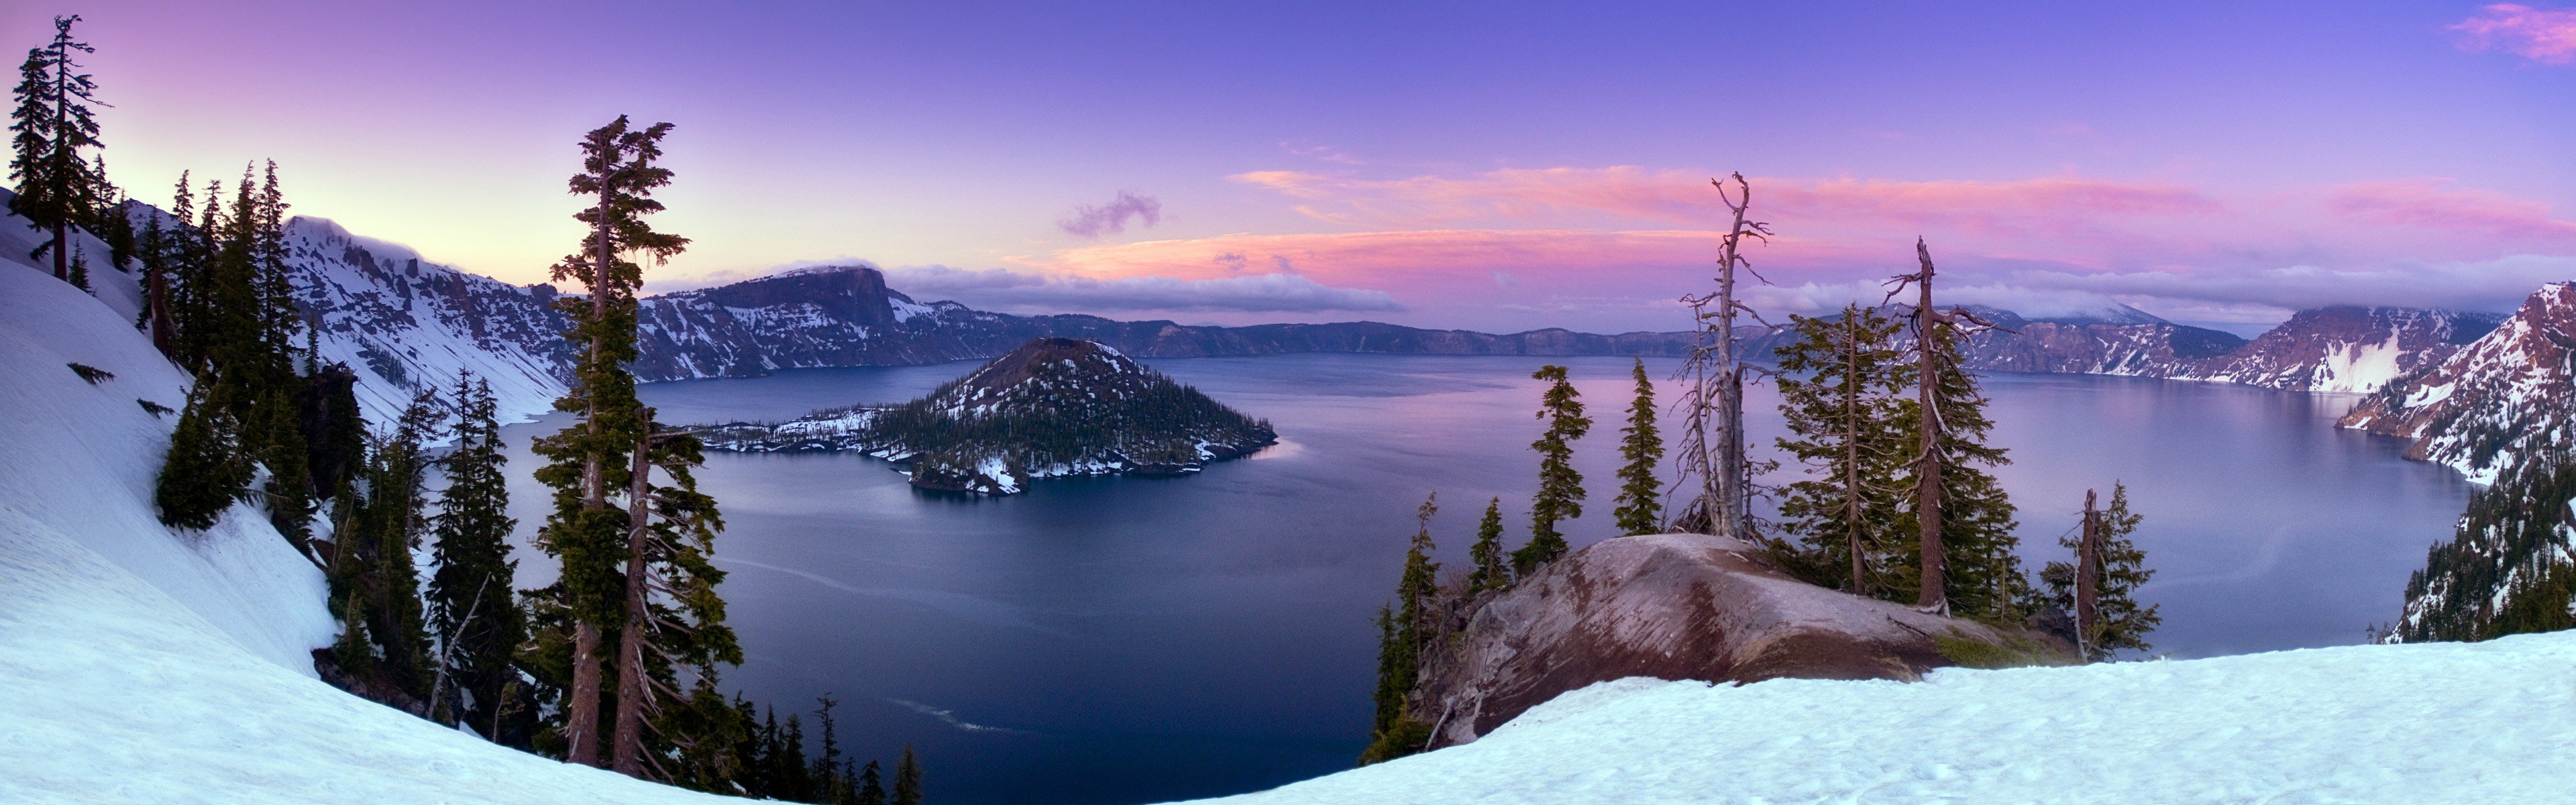 water, Landscapes, Snow, Trees, Oregon, Panorama, Snow, Landscapes, Crater, Lake, Emerald, Bay Wallpaper